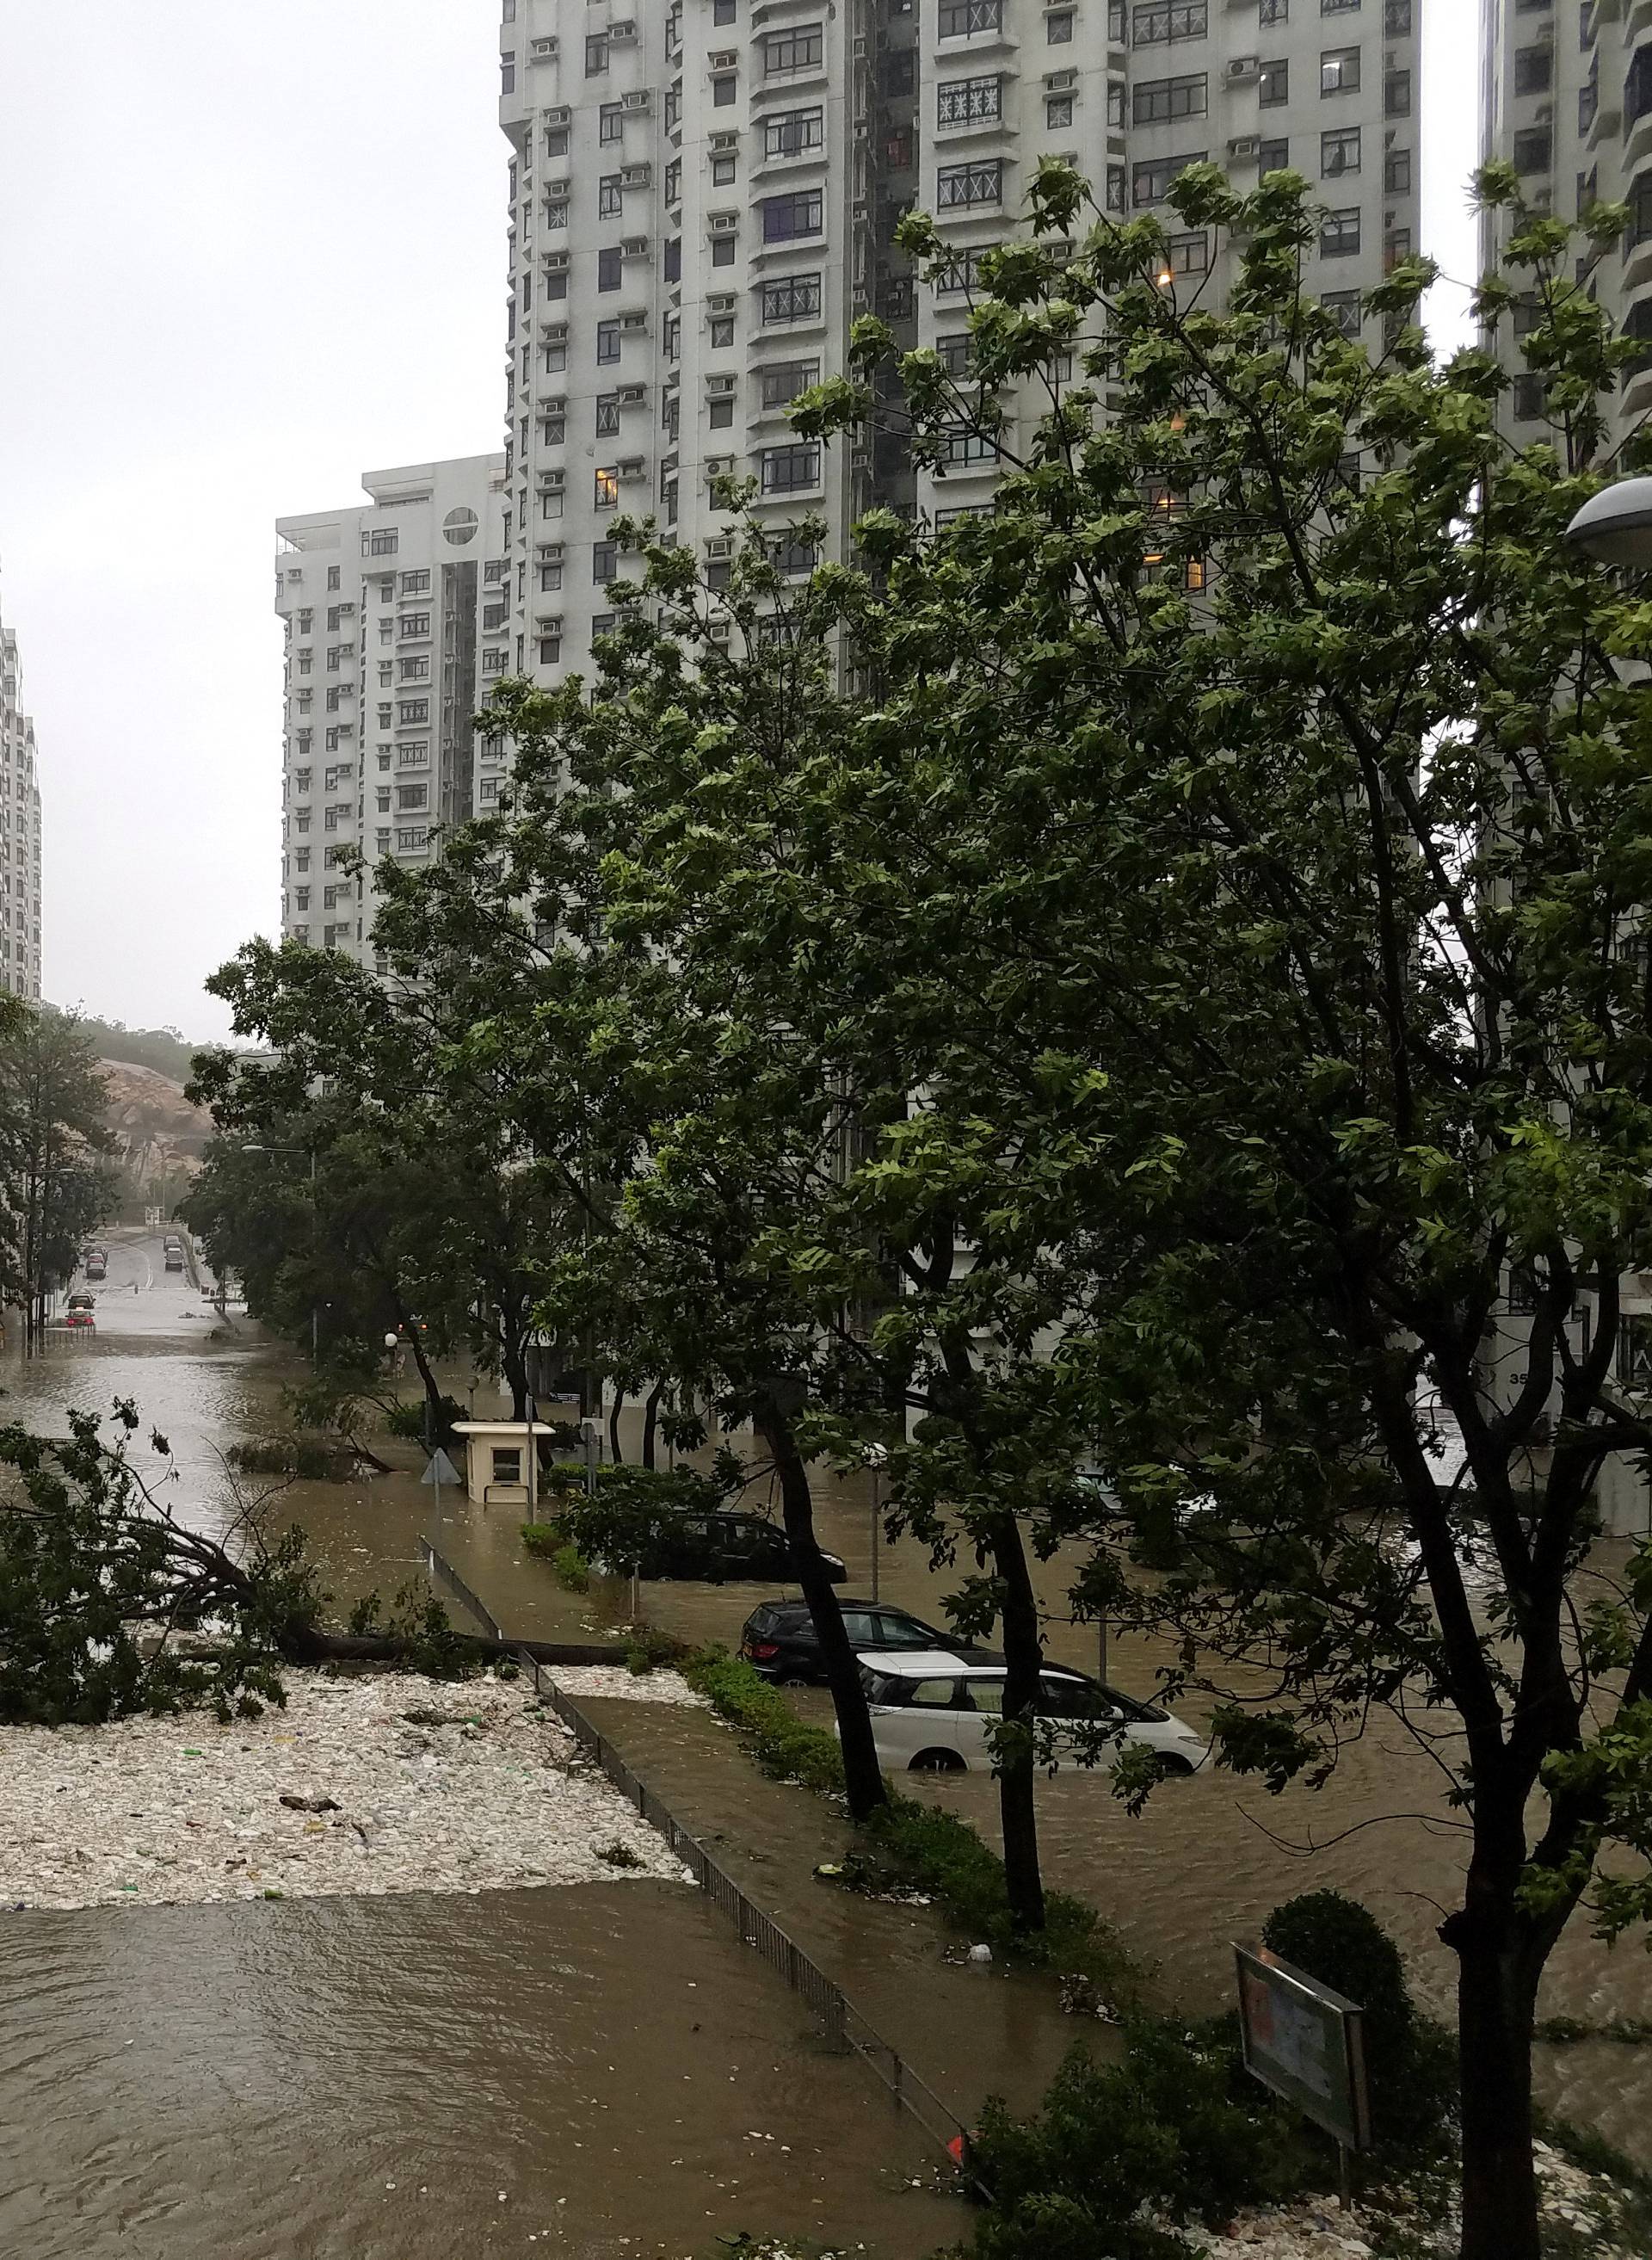 Foam brought by high waves is seen washed ashore in Heng Fa Chuen, a residential area near the waterfront, during Typhoon Mangkhut in Hong Kong